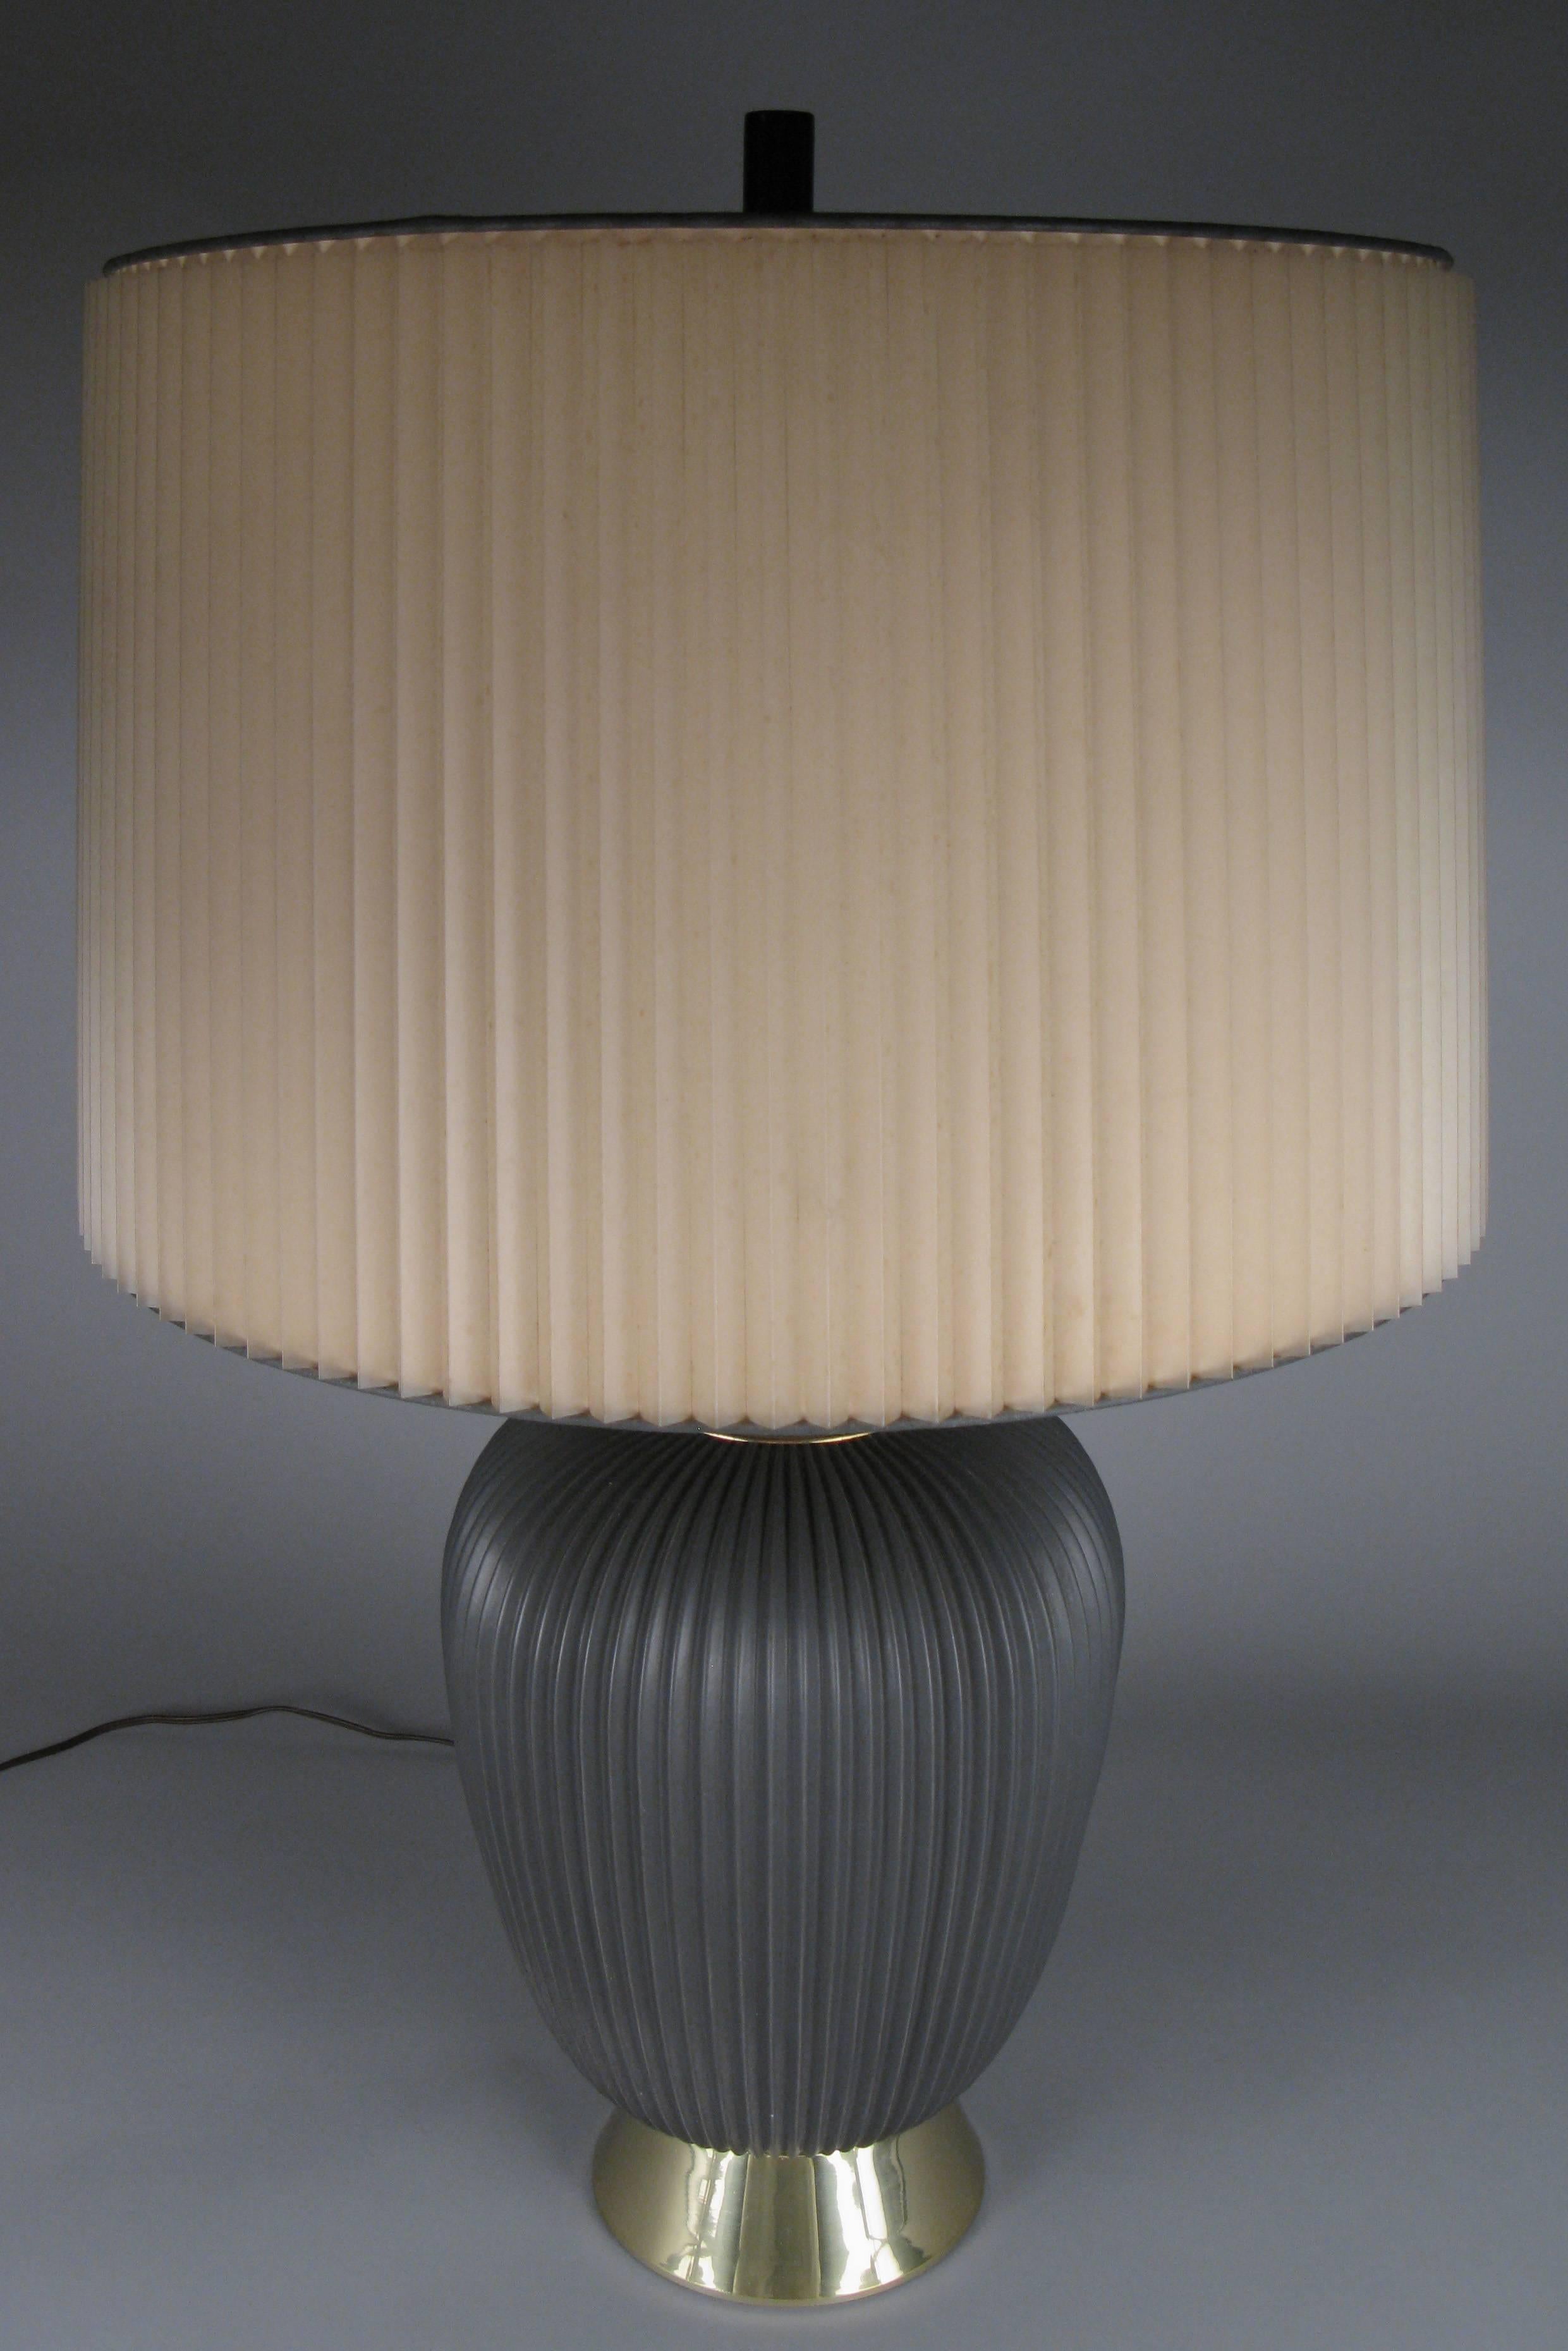 Mid-20th Century Mid-Century Modern 1950s Gray Ceramic Lamp by Gerald Thurston for Lightolier For Sale